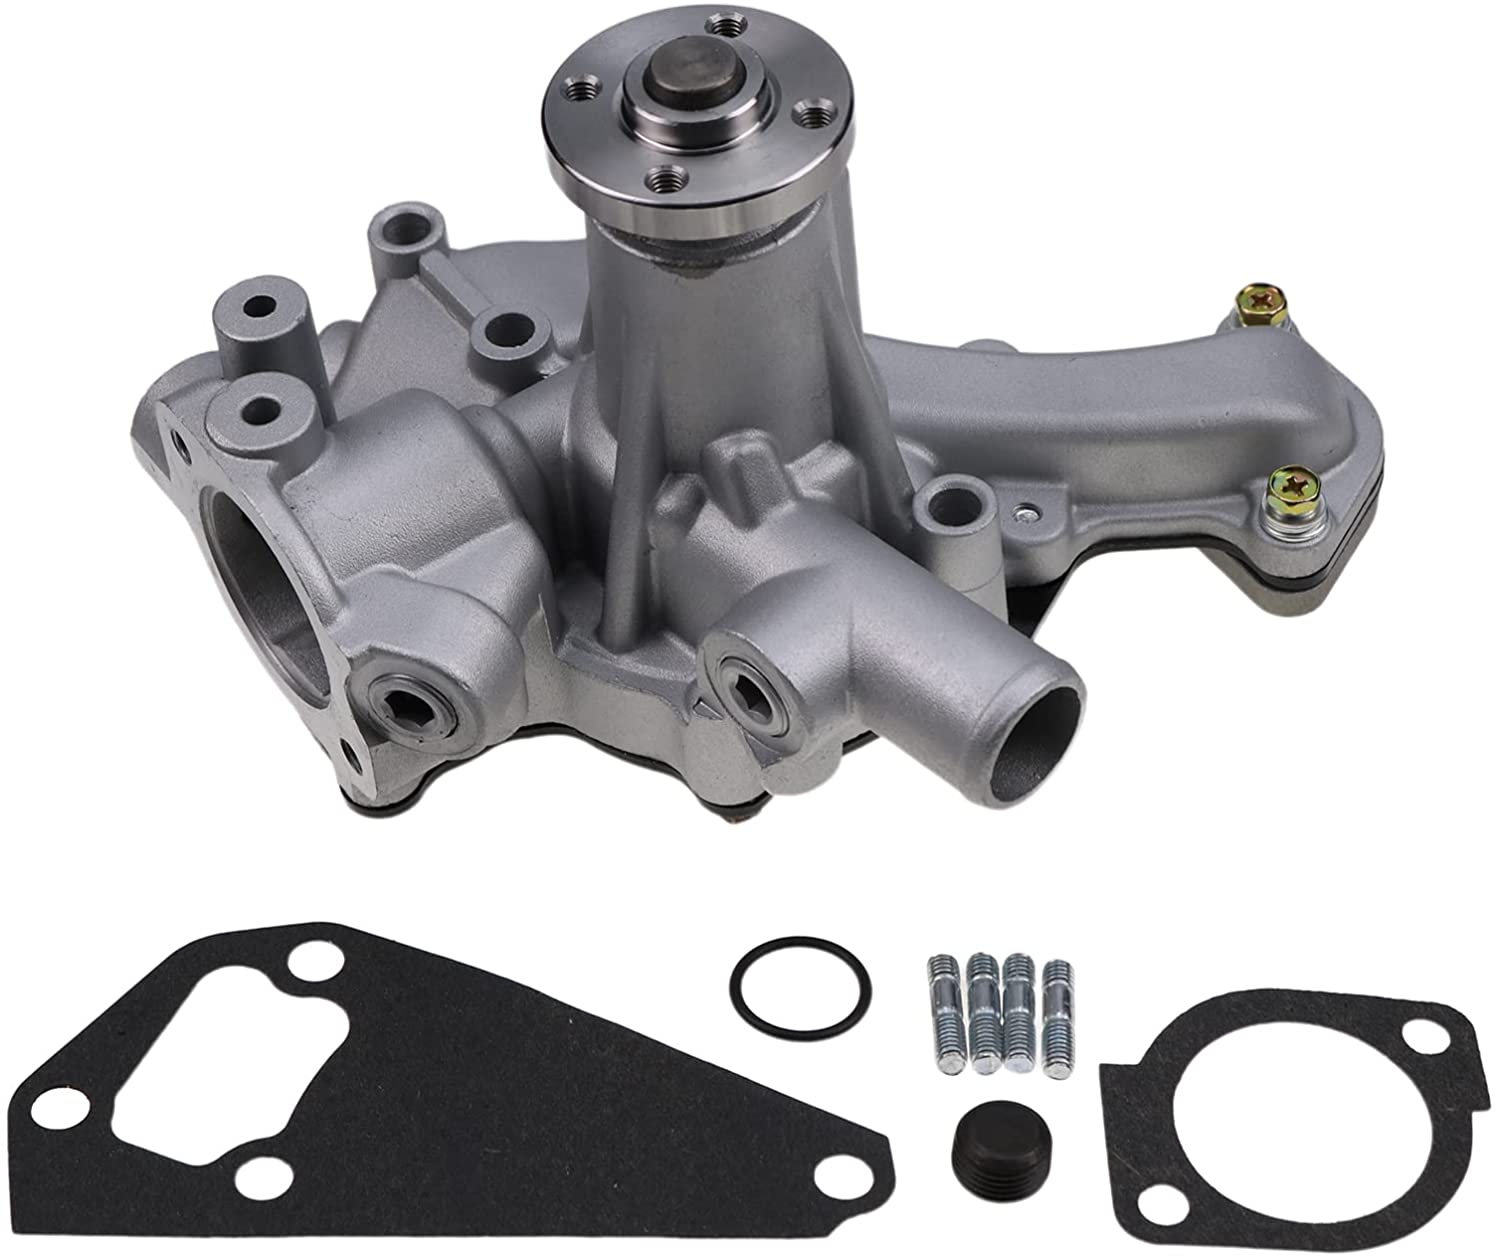 MIA880463 AM881505 AM881419 Water Pump with Gaskets for John Deere 110 Backhoe Loaders with 4TNE84-EJTLB Engine - KUDUPARTS